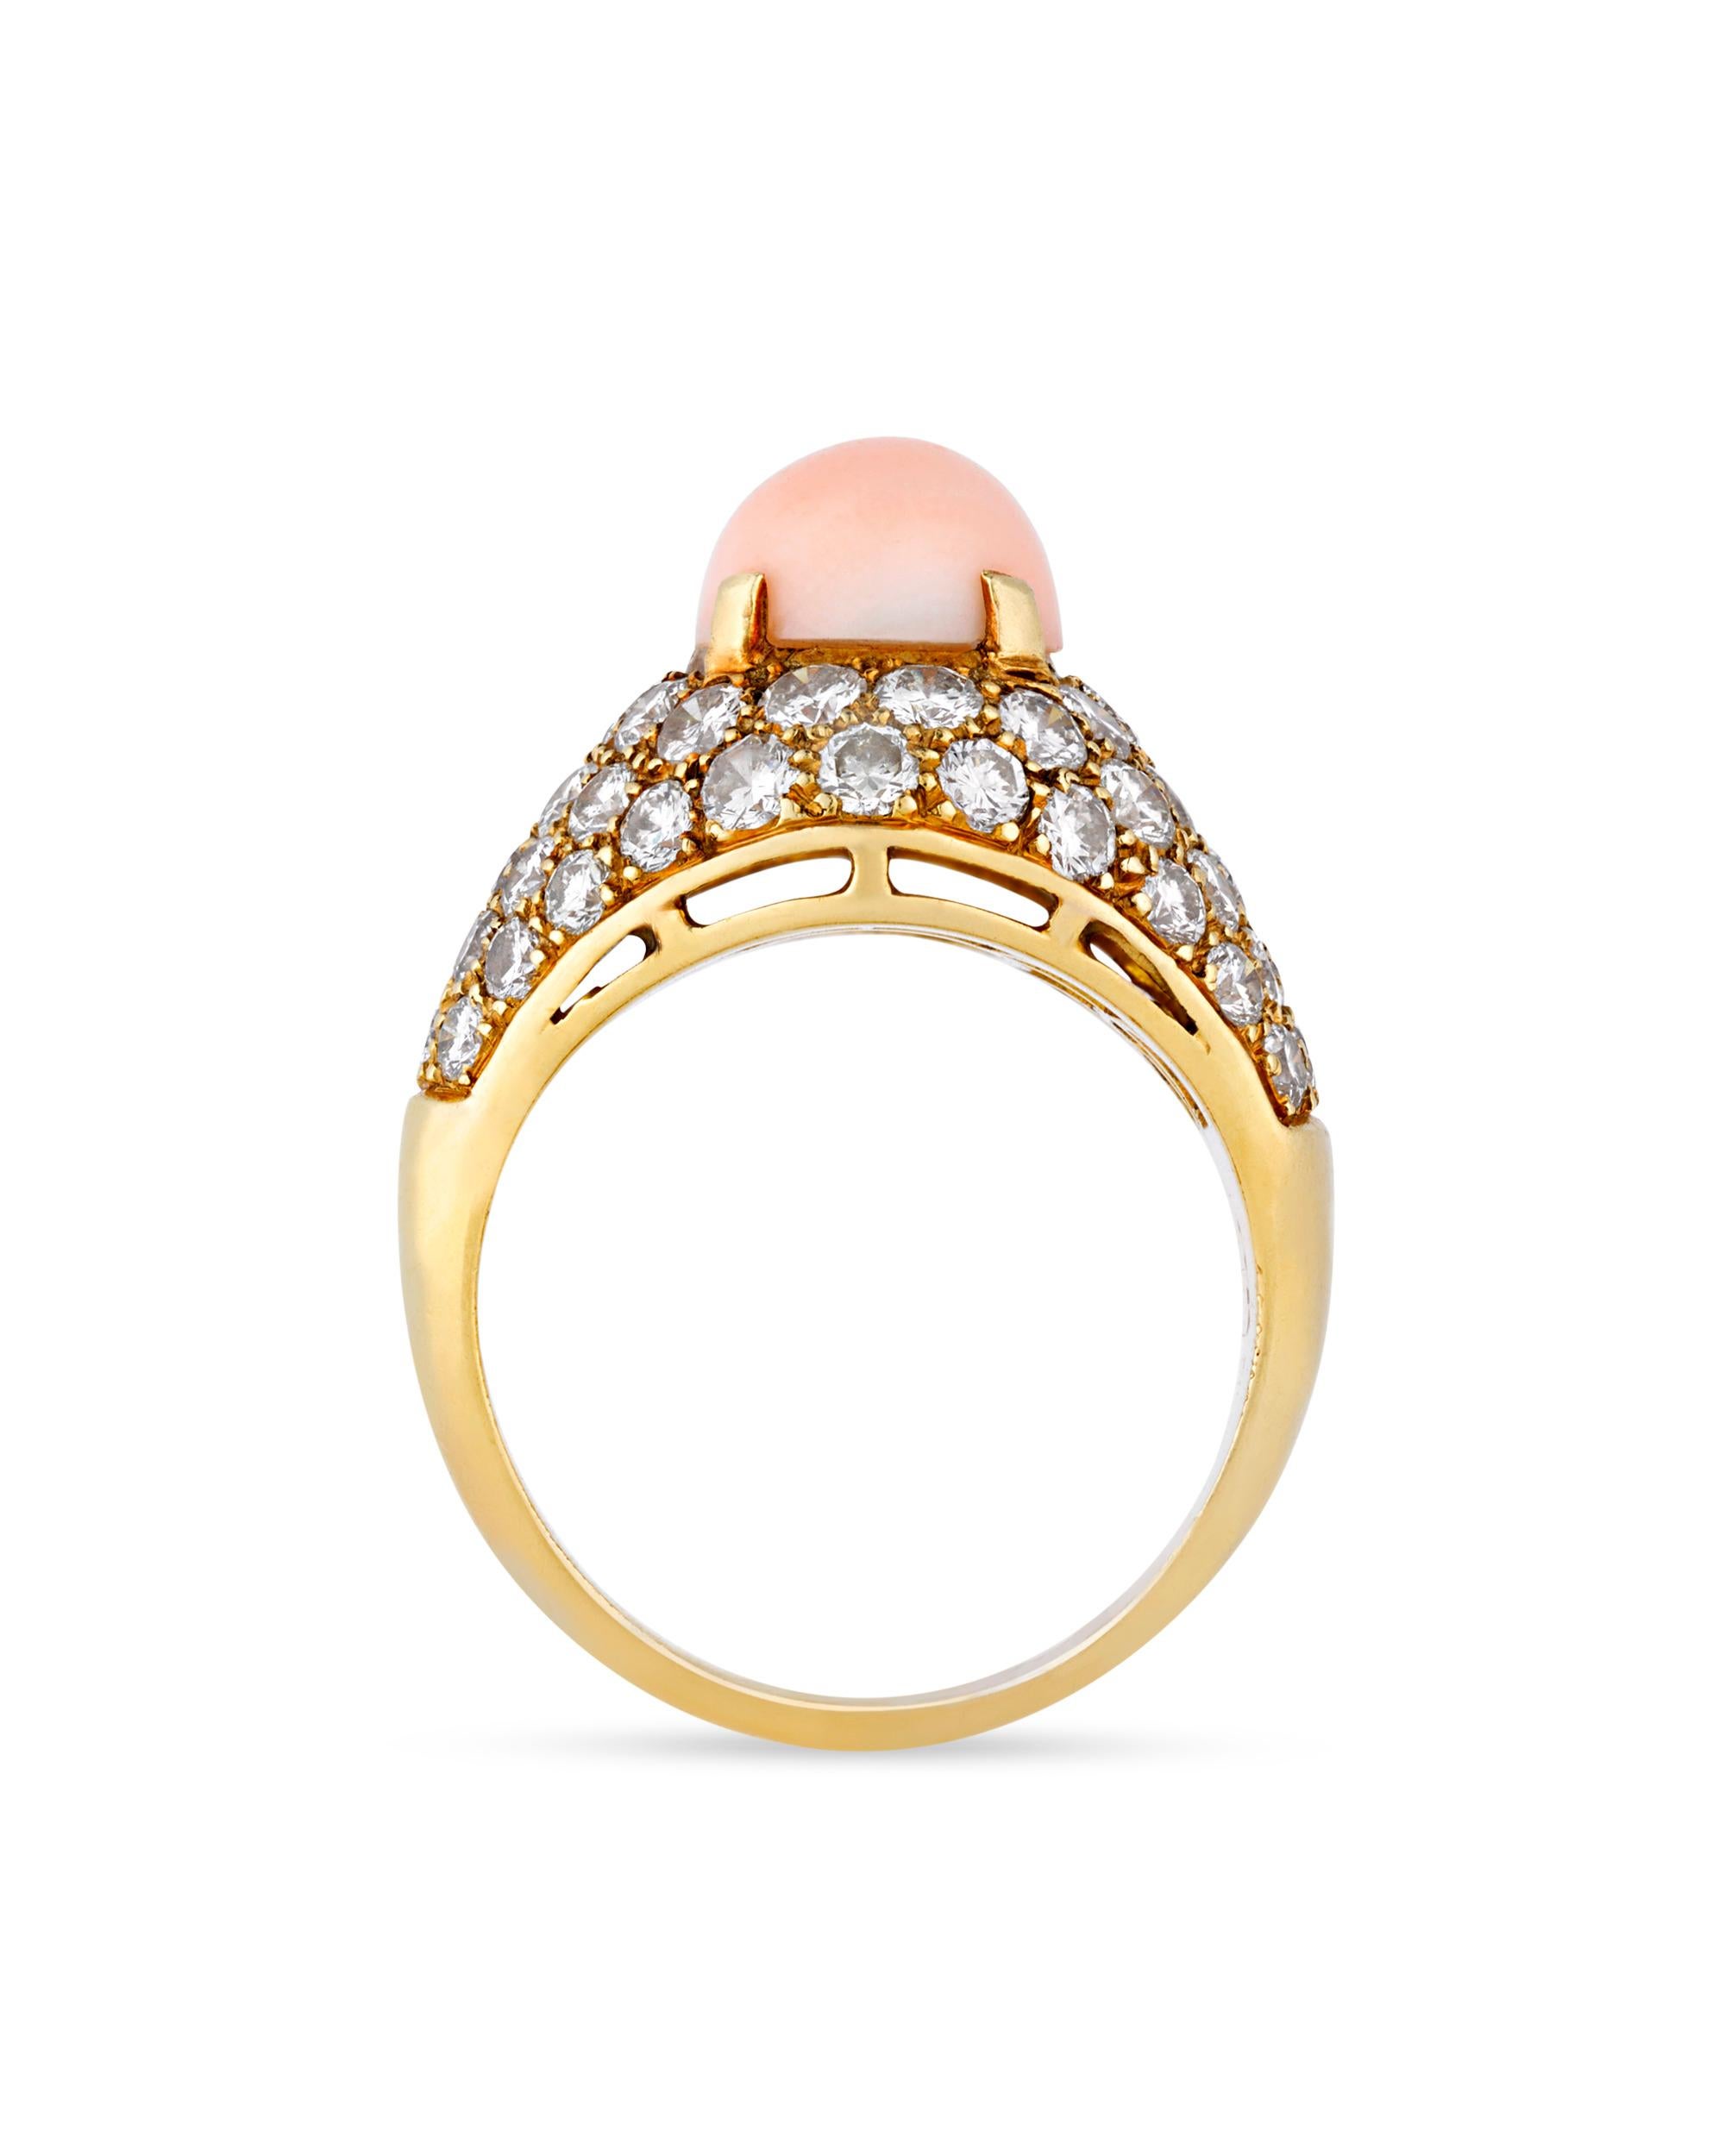 This vintage coral and diamond ring by the French jewelry maison Van Cleef & Arpels makes a classic statement. The exceptional coral cabochon at its center exhibits a delicate “angel skin” hue, the pale pink color that is most desired in coral